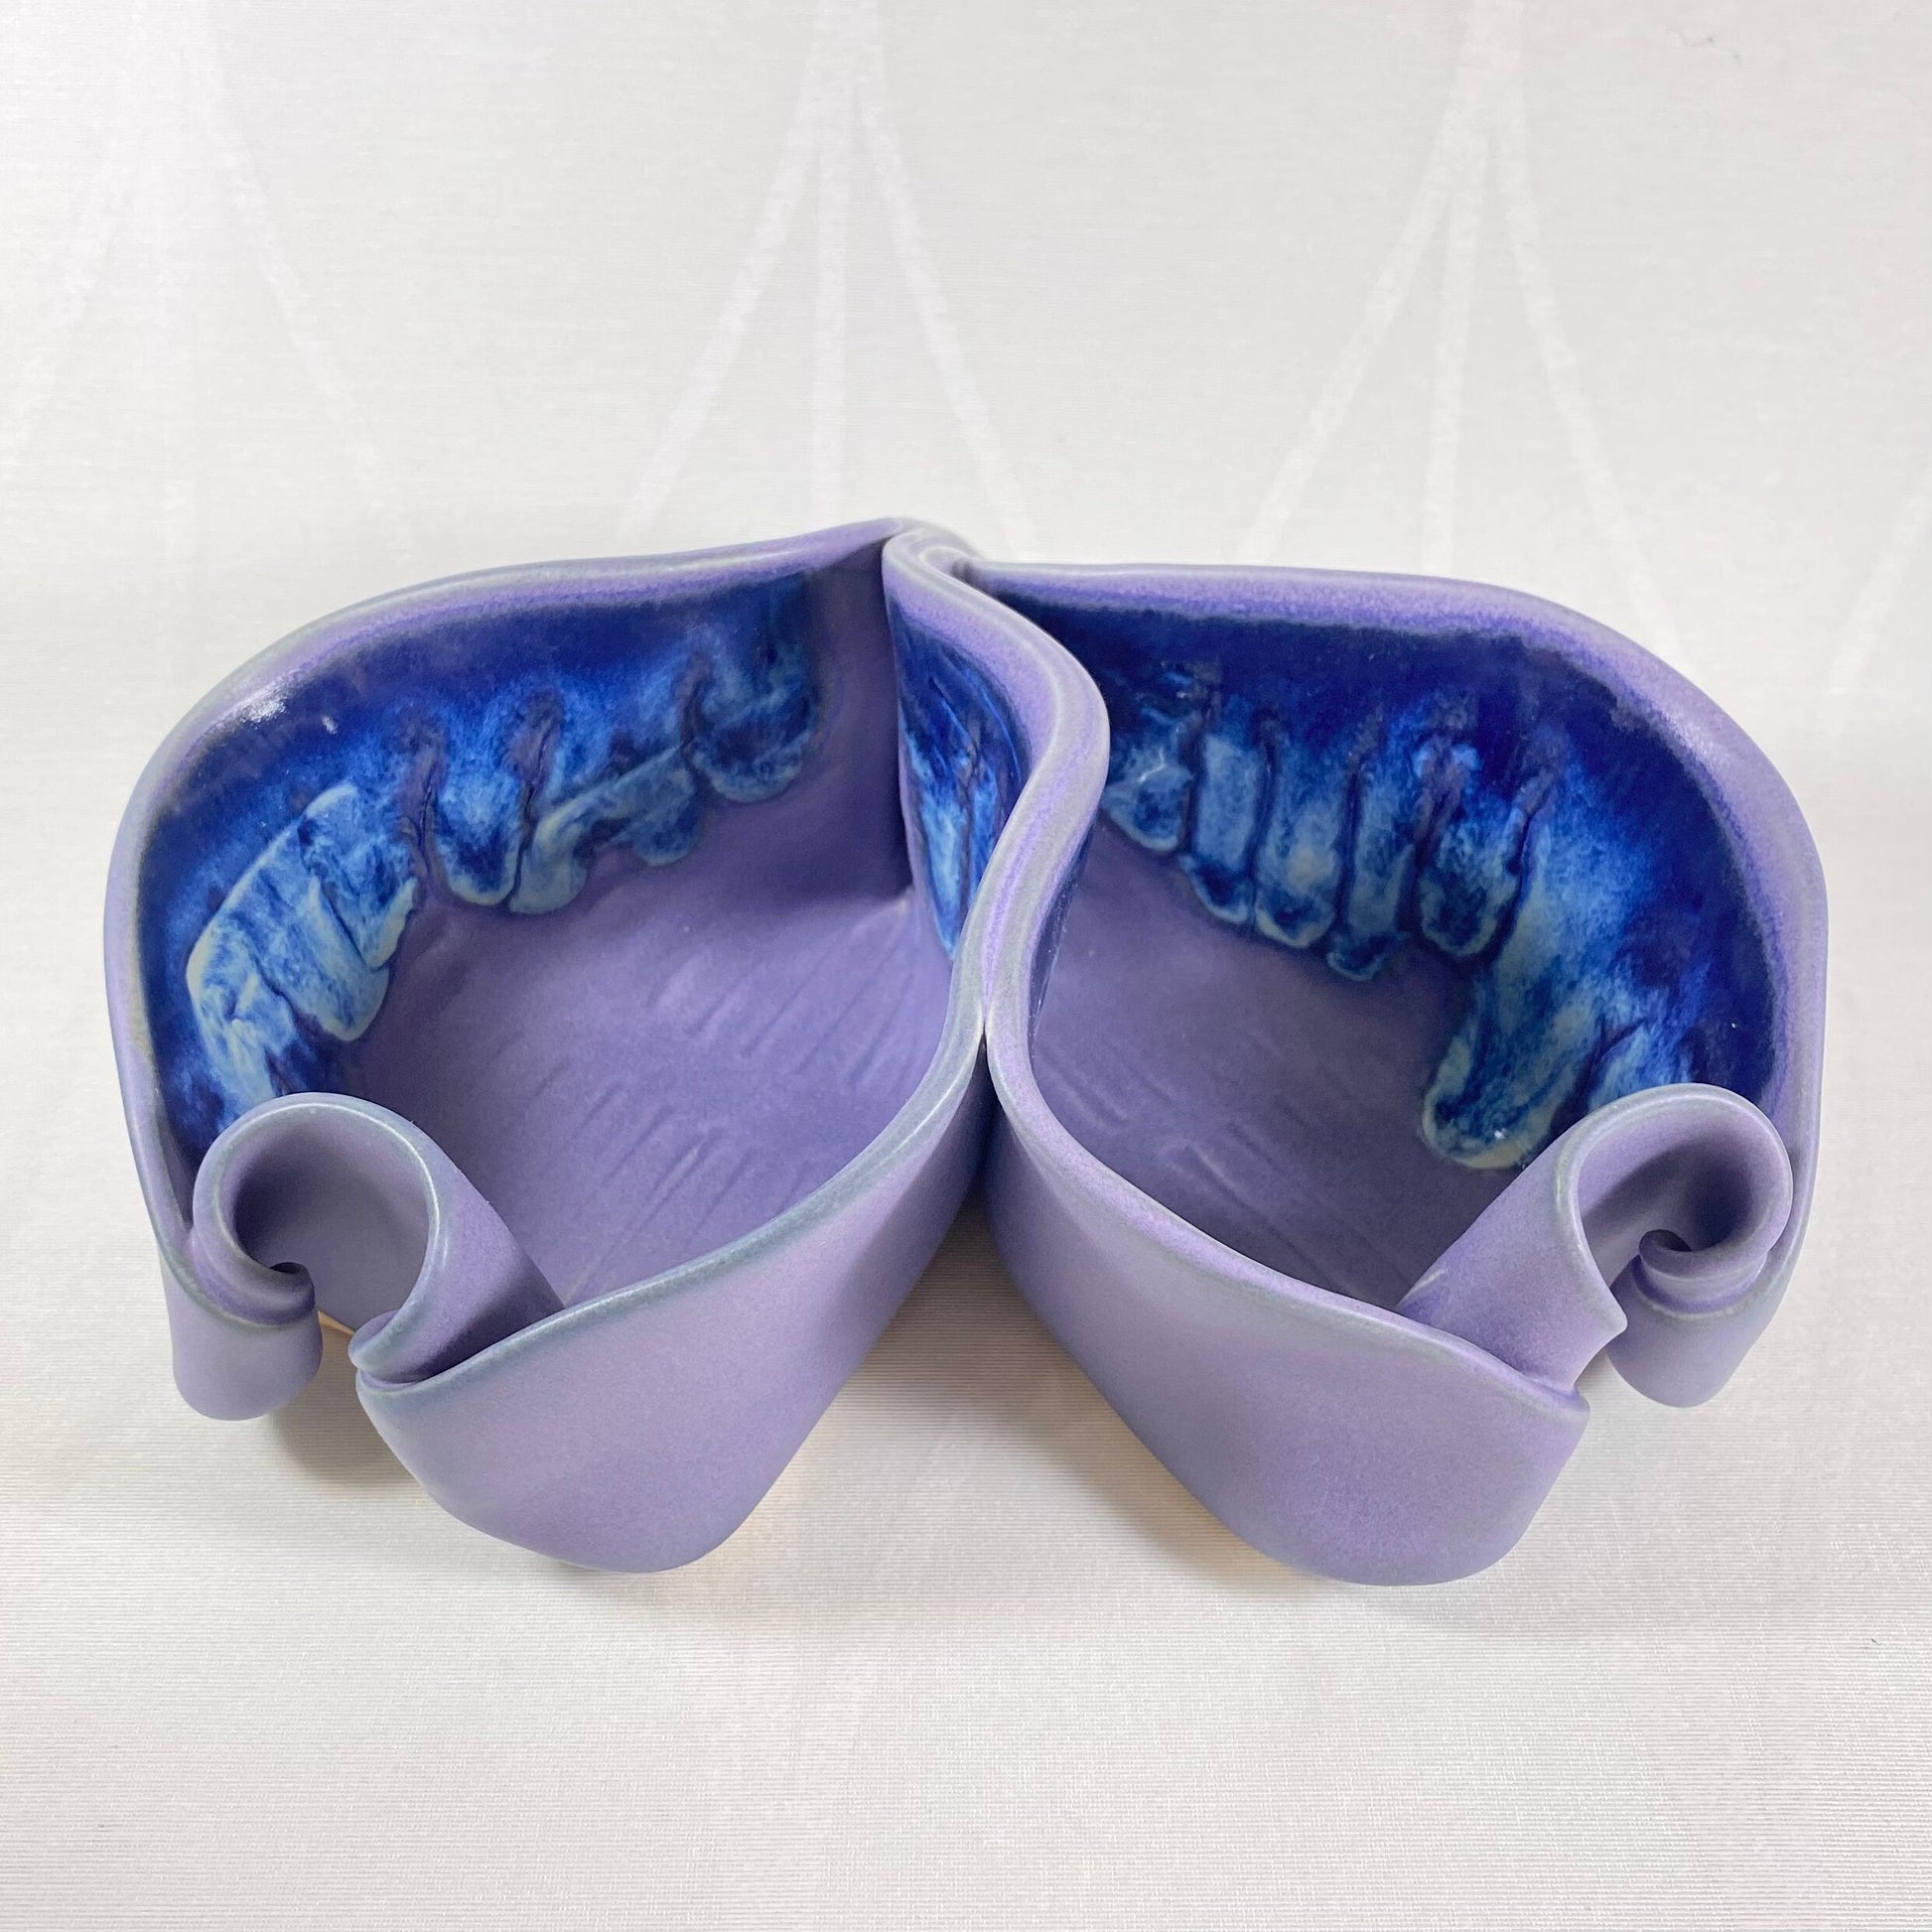 Handmade Purple and Blue Double Sided Pistachio Bowl with Serving Spoon, Functional and Decorative Pottery